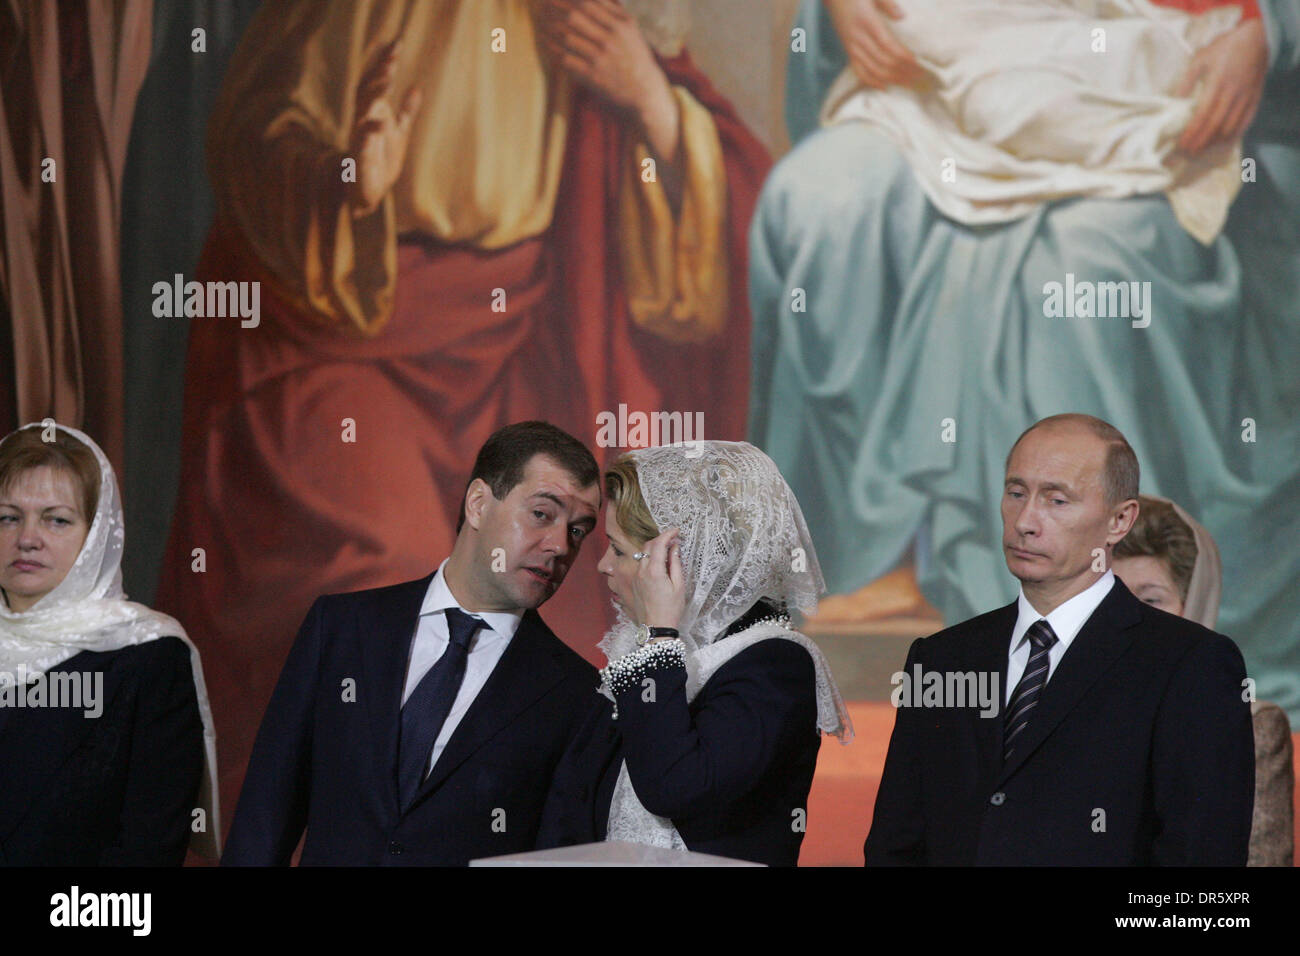 Feb 01, 2009 - Moscow, Russia - Wife of President of Moldova TAISIYA VORONINA (L), President DMITRY MEDVEDEV , his wife, SVETLANA MEDVEDEVA and Prime Minister VLADIMIR PUTIN (R) attending the enthronement ceremony of Patriarch Kirill of Moscow and All Russia, the 16th leader of the Russian Orthodox Church, at the Cathedral of Christ the Savior. (Credit Image: © PhotoXpress/ZUMA Pre Stock Photo